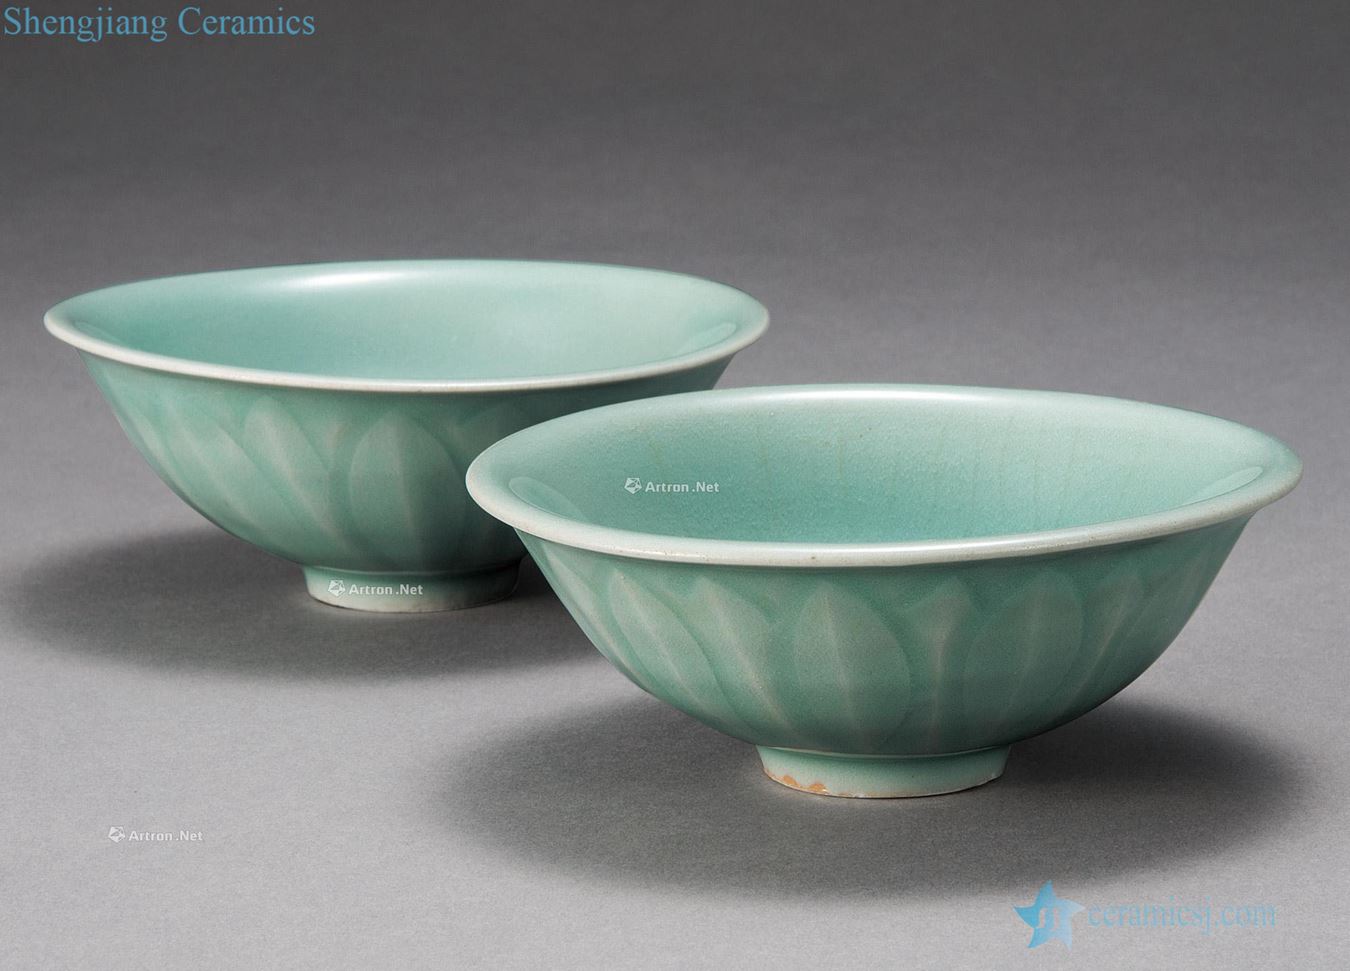 The song dynasty Longquan celadon green magnetic lotus-shaped bowl